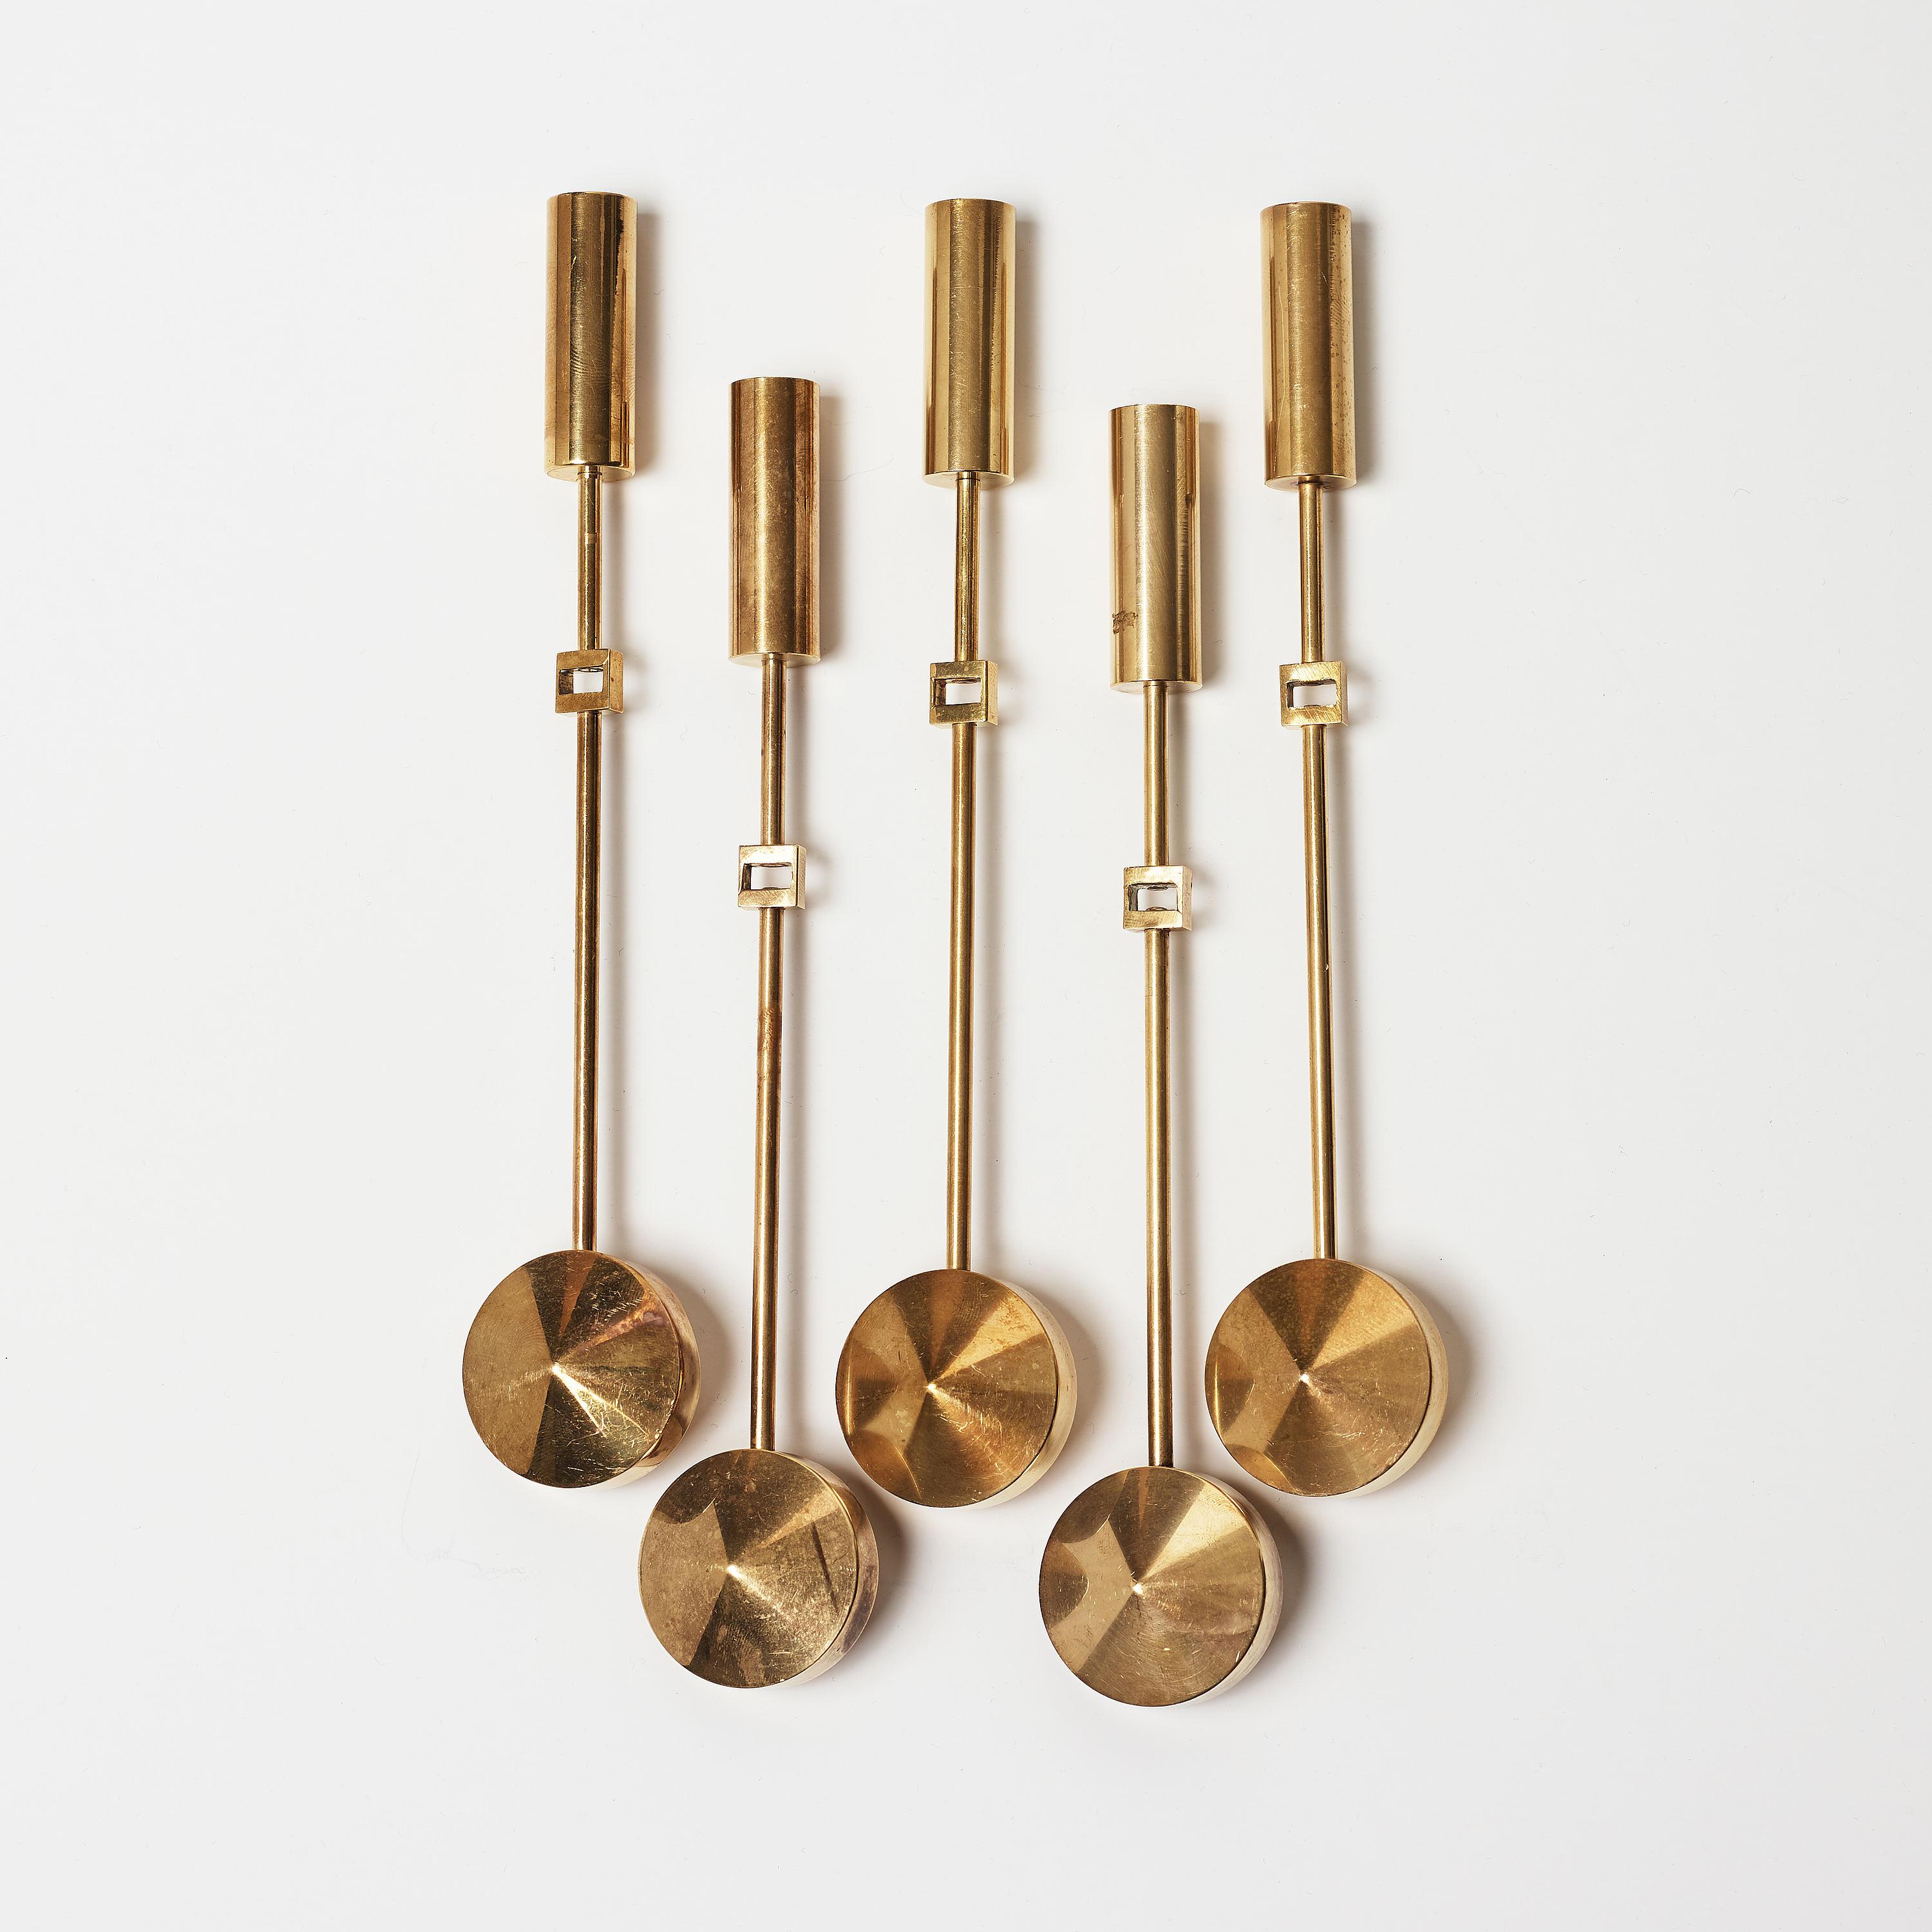  Brass Swedish wall mounted candle holders designed by Pierre Forsell and manufactured by Skultuna, 1955s. Model - Pendal No 71.   
Good Condition 
Serie of 12 pieces price by item
The pendulum weighted candle holder section simply slots onto the